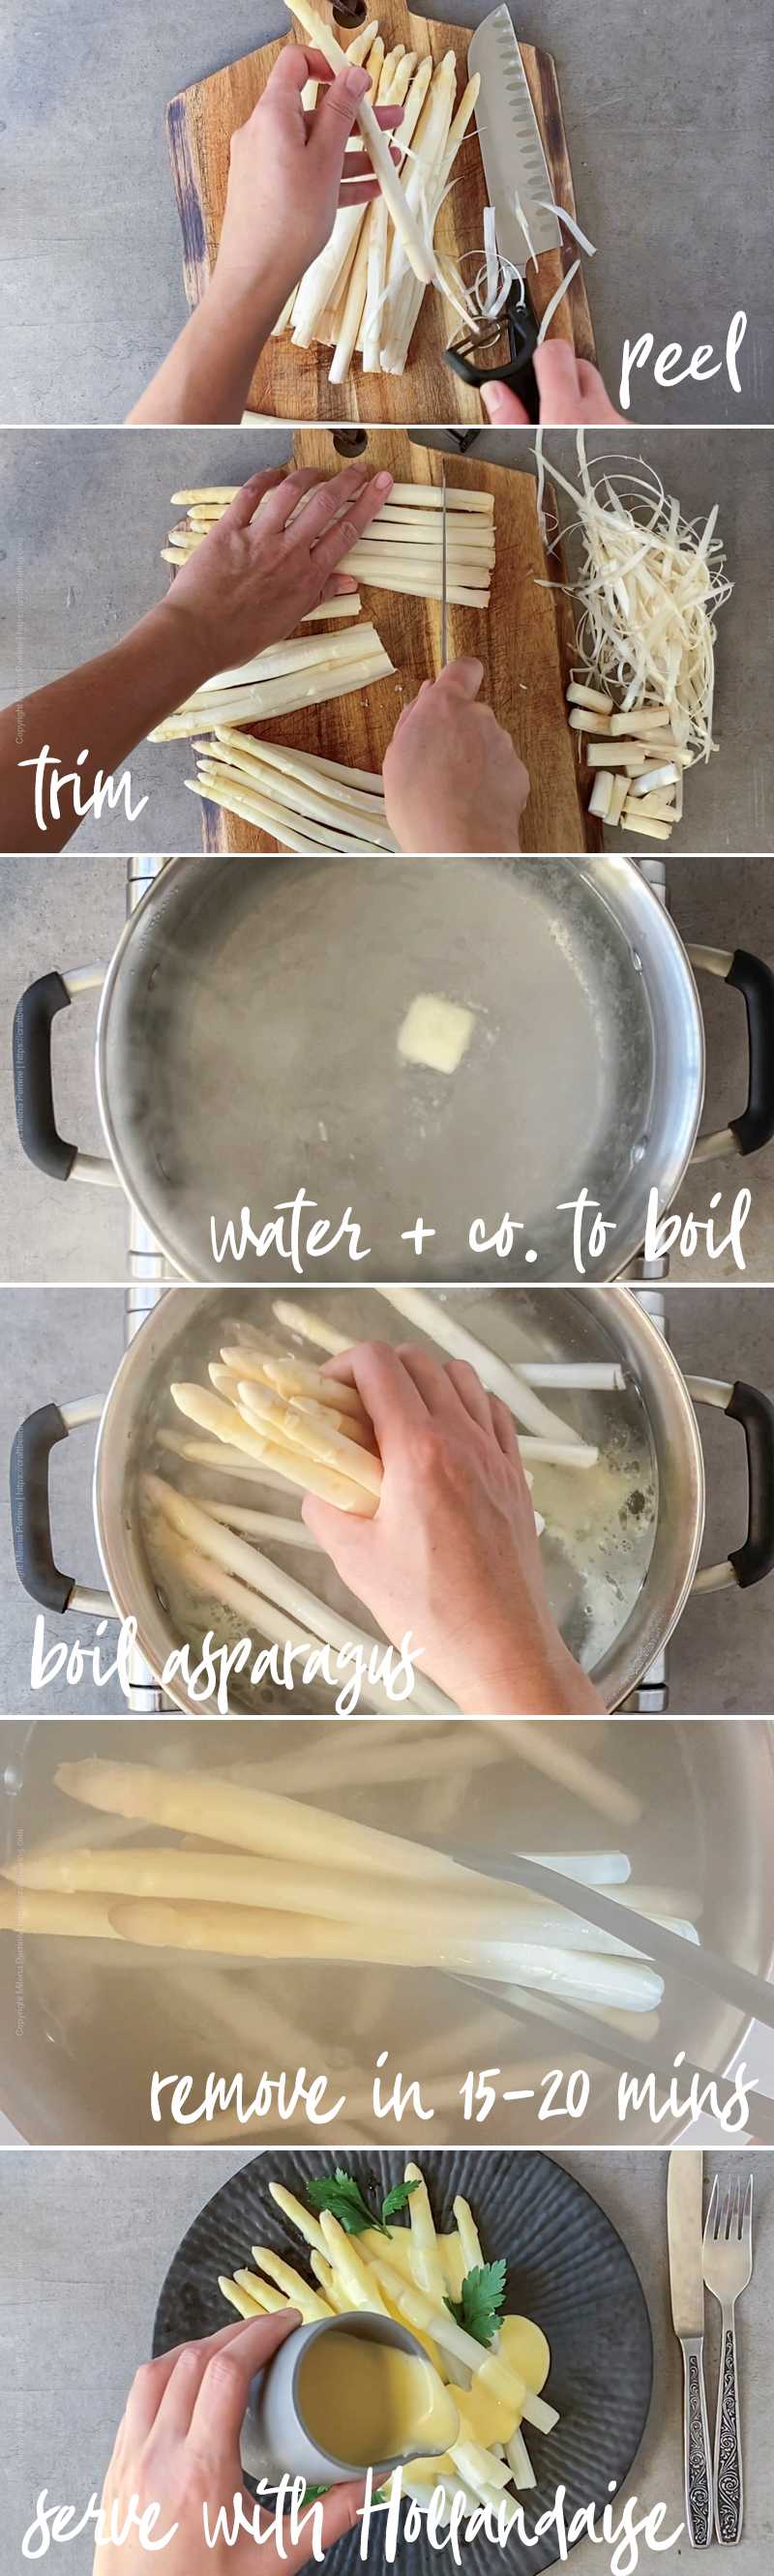 How to cook white asparagus - step-by-step.